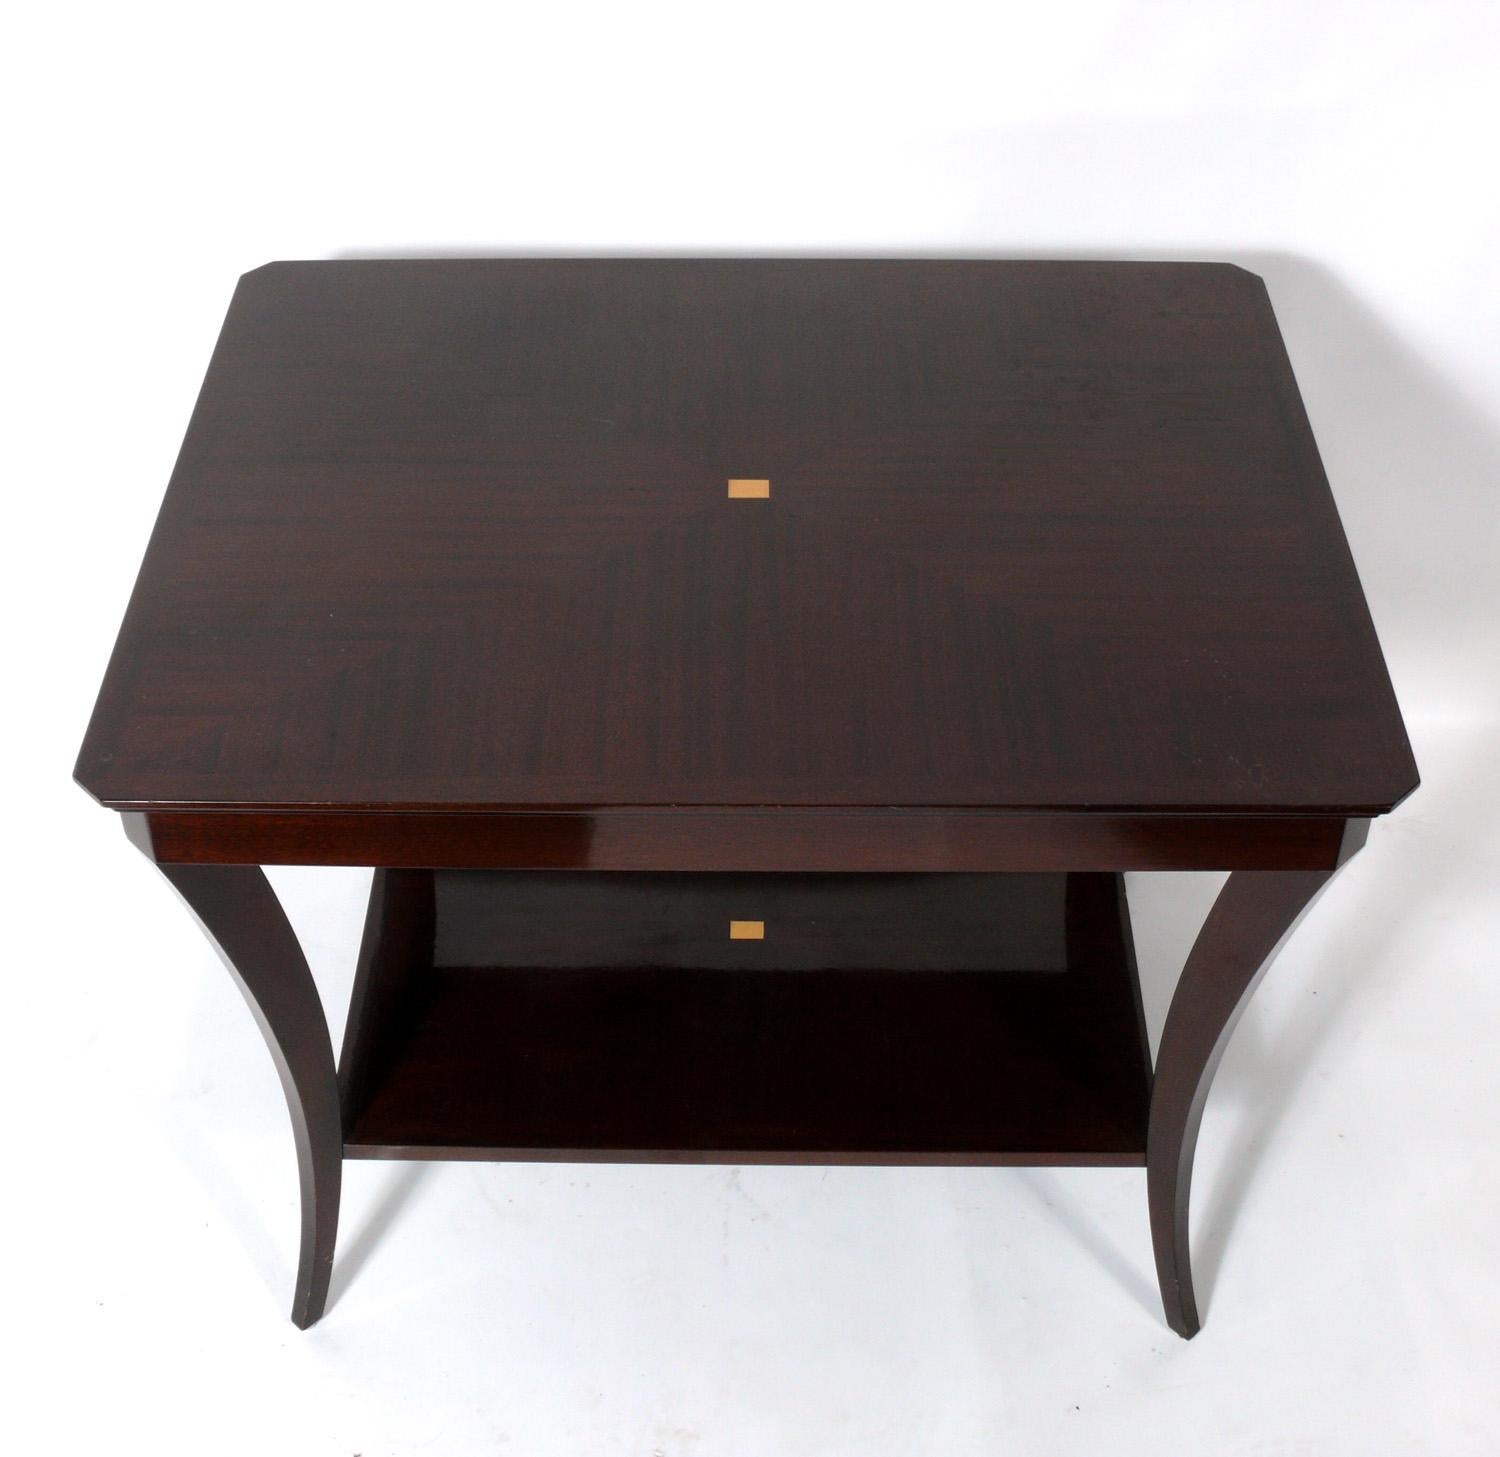 Elegant flared leg table in the manner of Tommi Parzinger, American, circa 1990s. Beautifully grained wood with contrasting inlay. It is a versatile size and can be used as a center table, end or side table, or night stand.